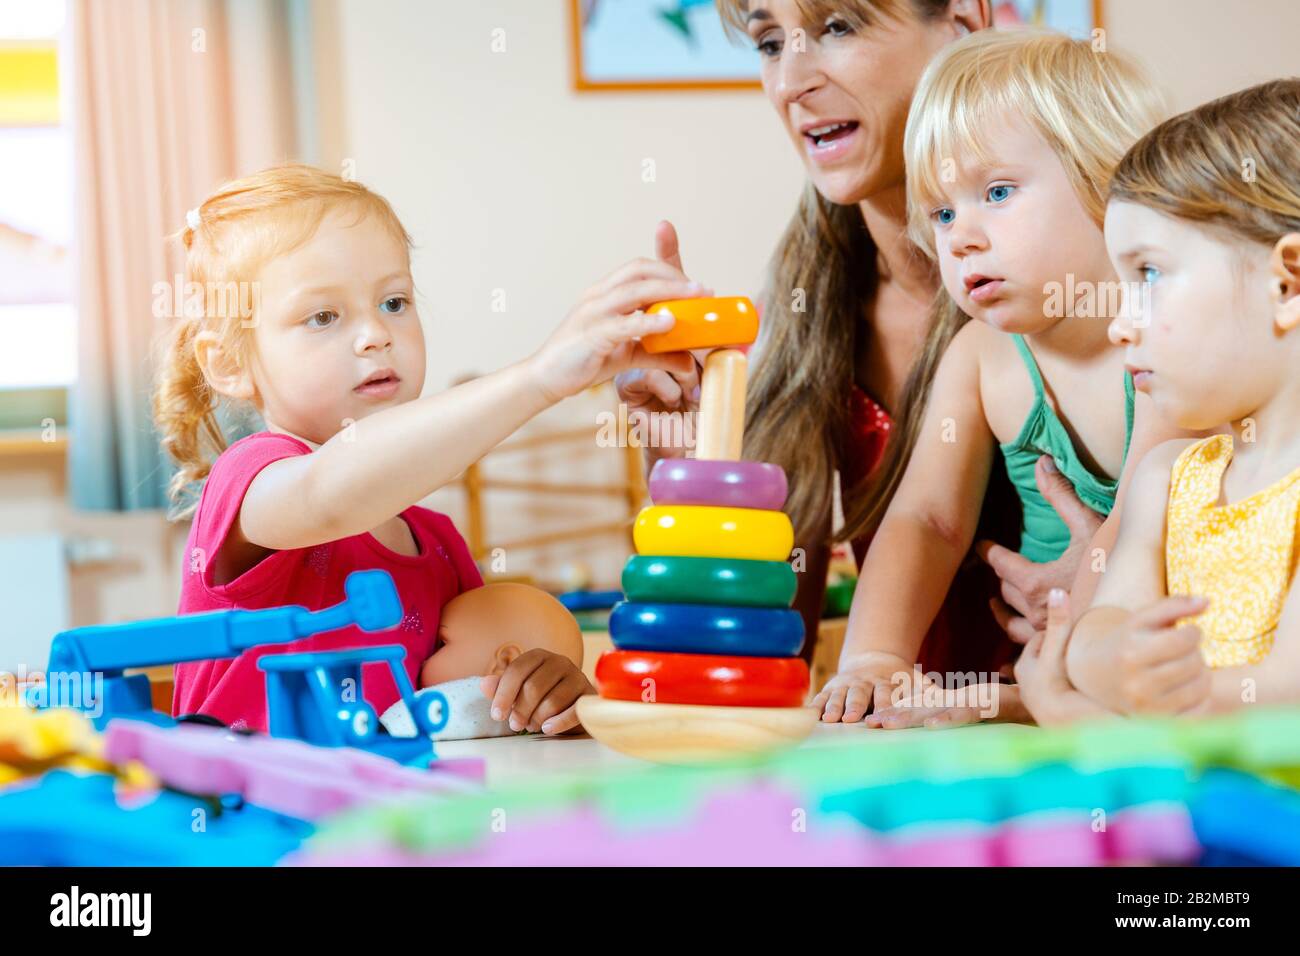 Children in nursery school learning and playing Stock Photo